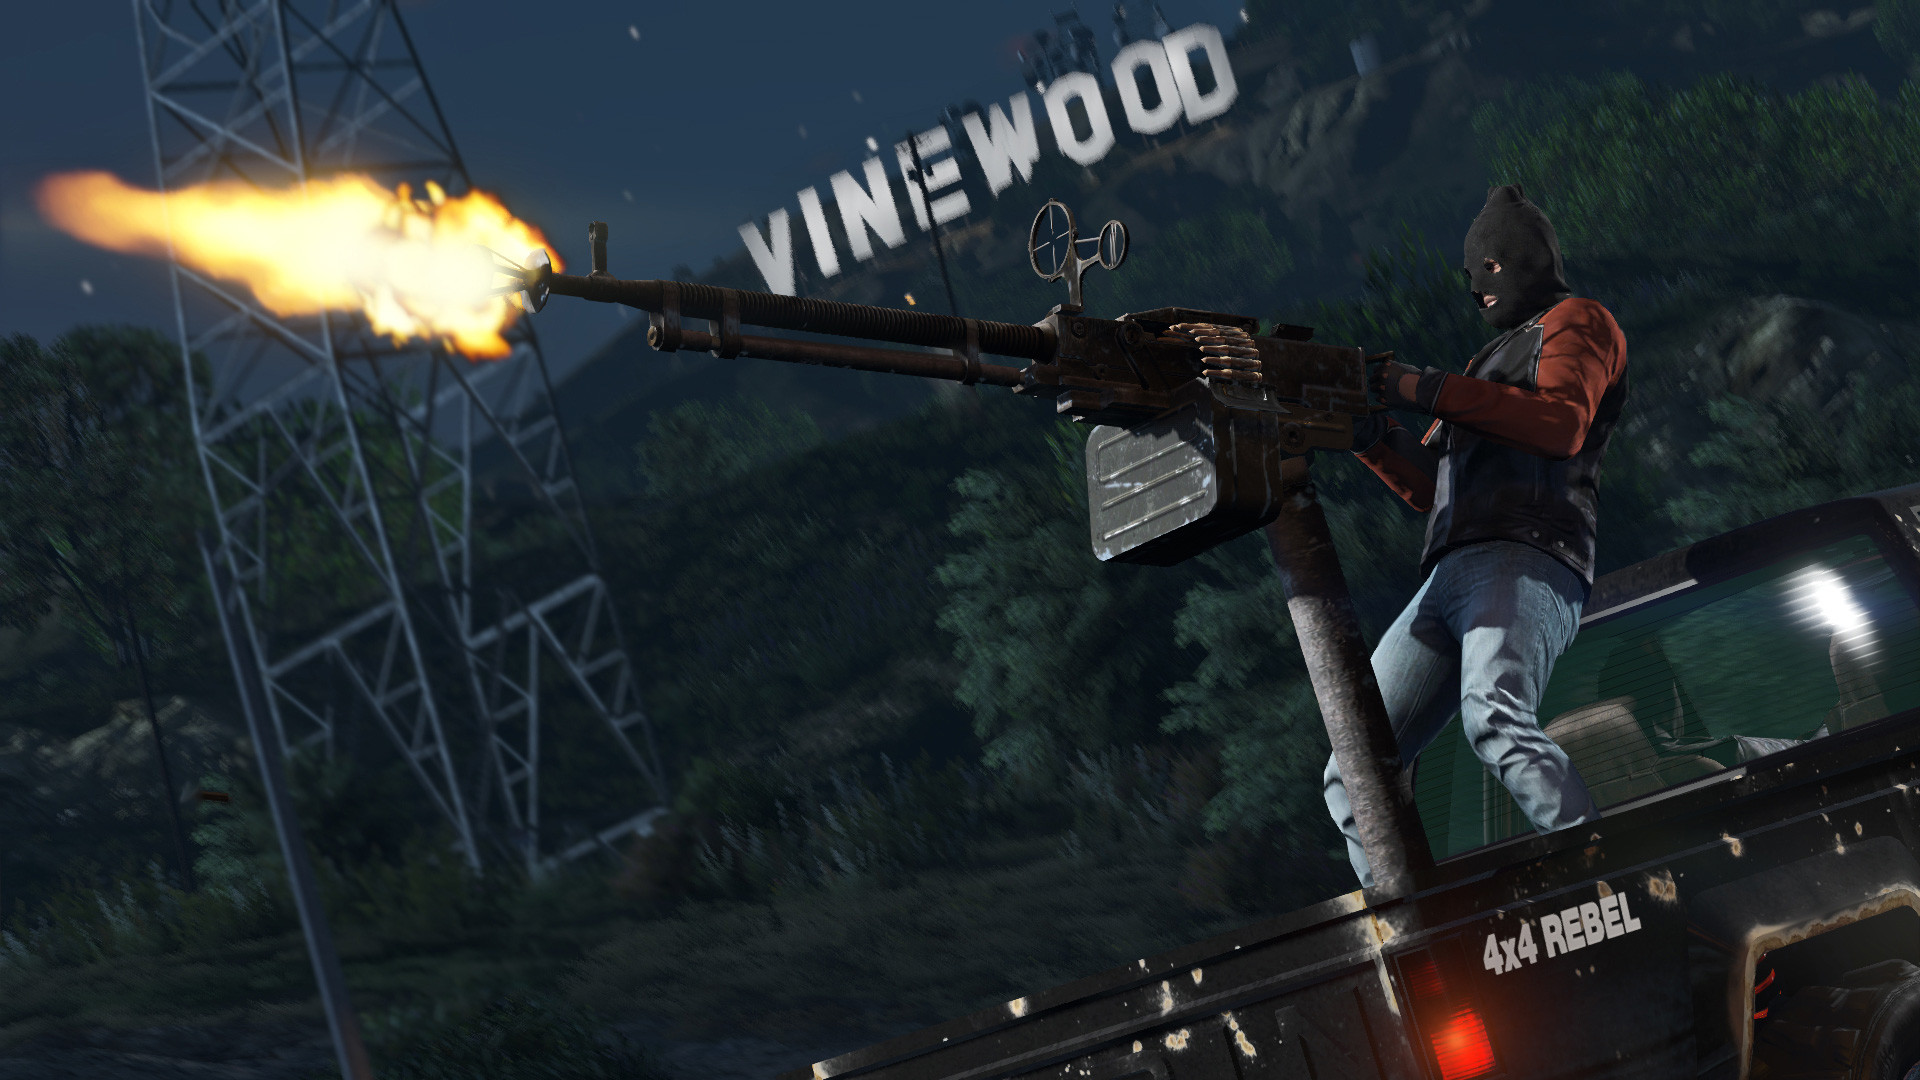 1920x1080 Grand Theft Auto V Wallpapers HD | GTA V Cool Wallpapers | #5